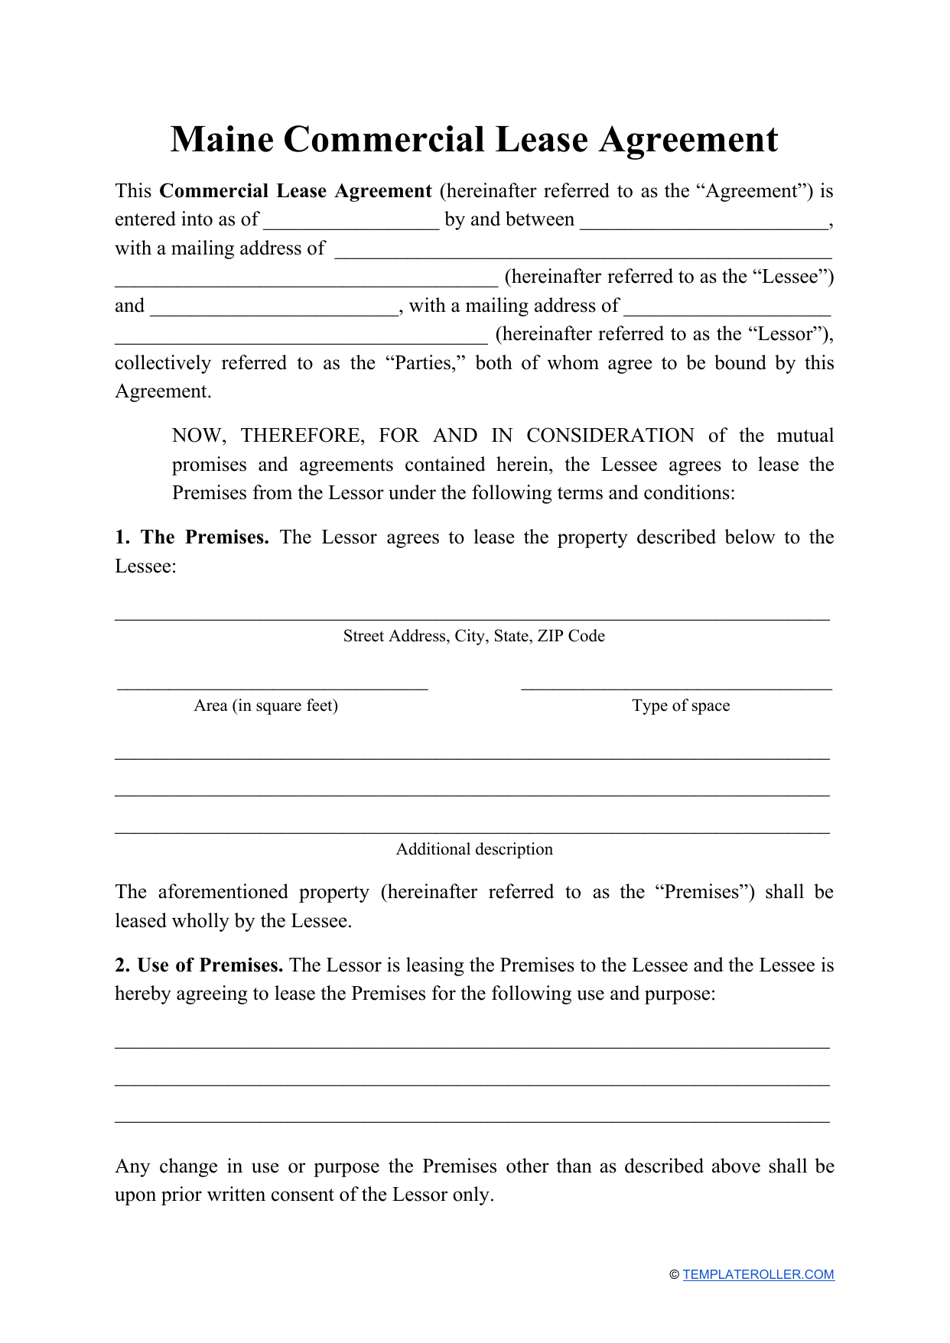 Maine Commercial Lease Agreement Template Fill Out, Sign Online and